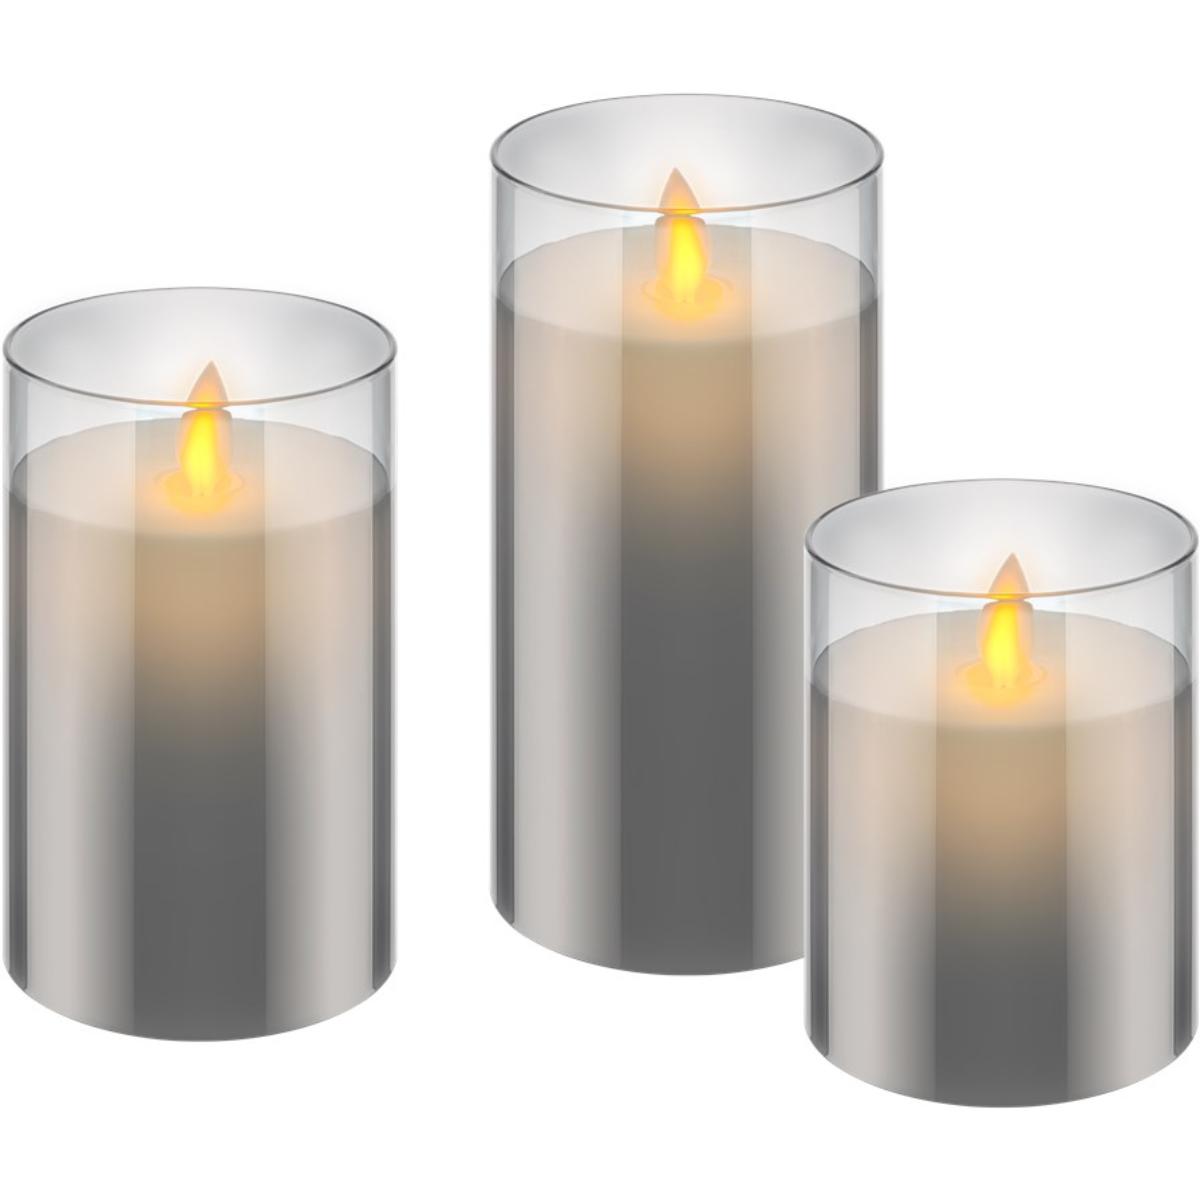 Set of 3 LED real wax candles in glass Beautiful and safe lighting solu - Goobay